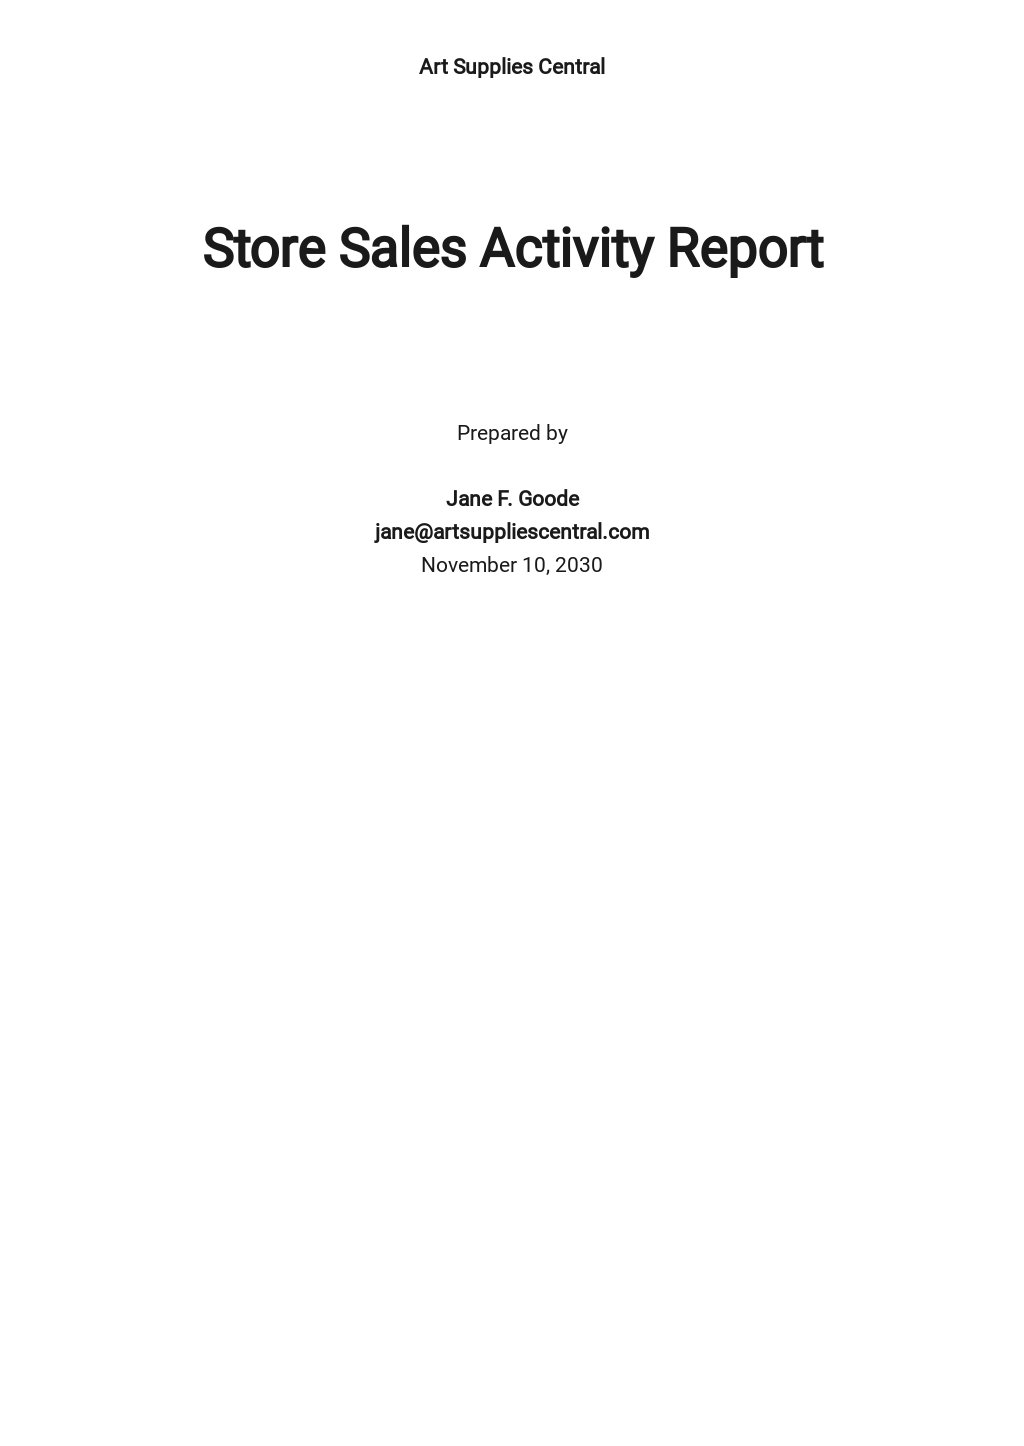 Daily Sales Activity Report Template in Google Docs, Google Sheets, Word